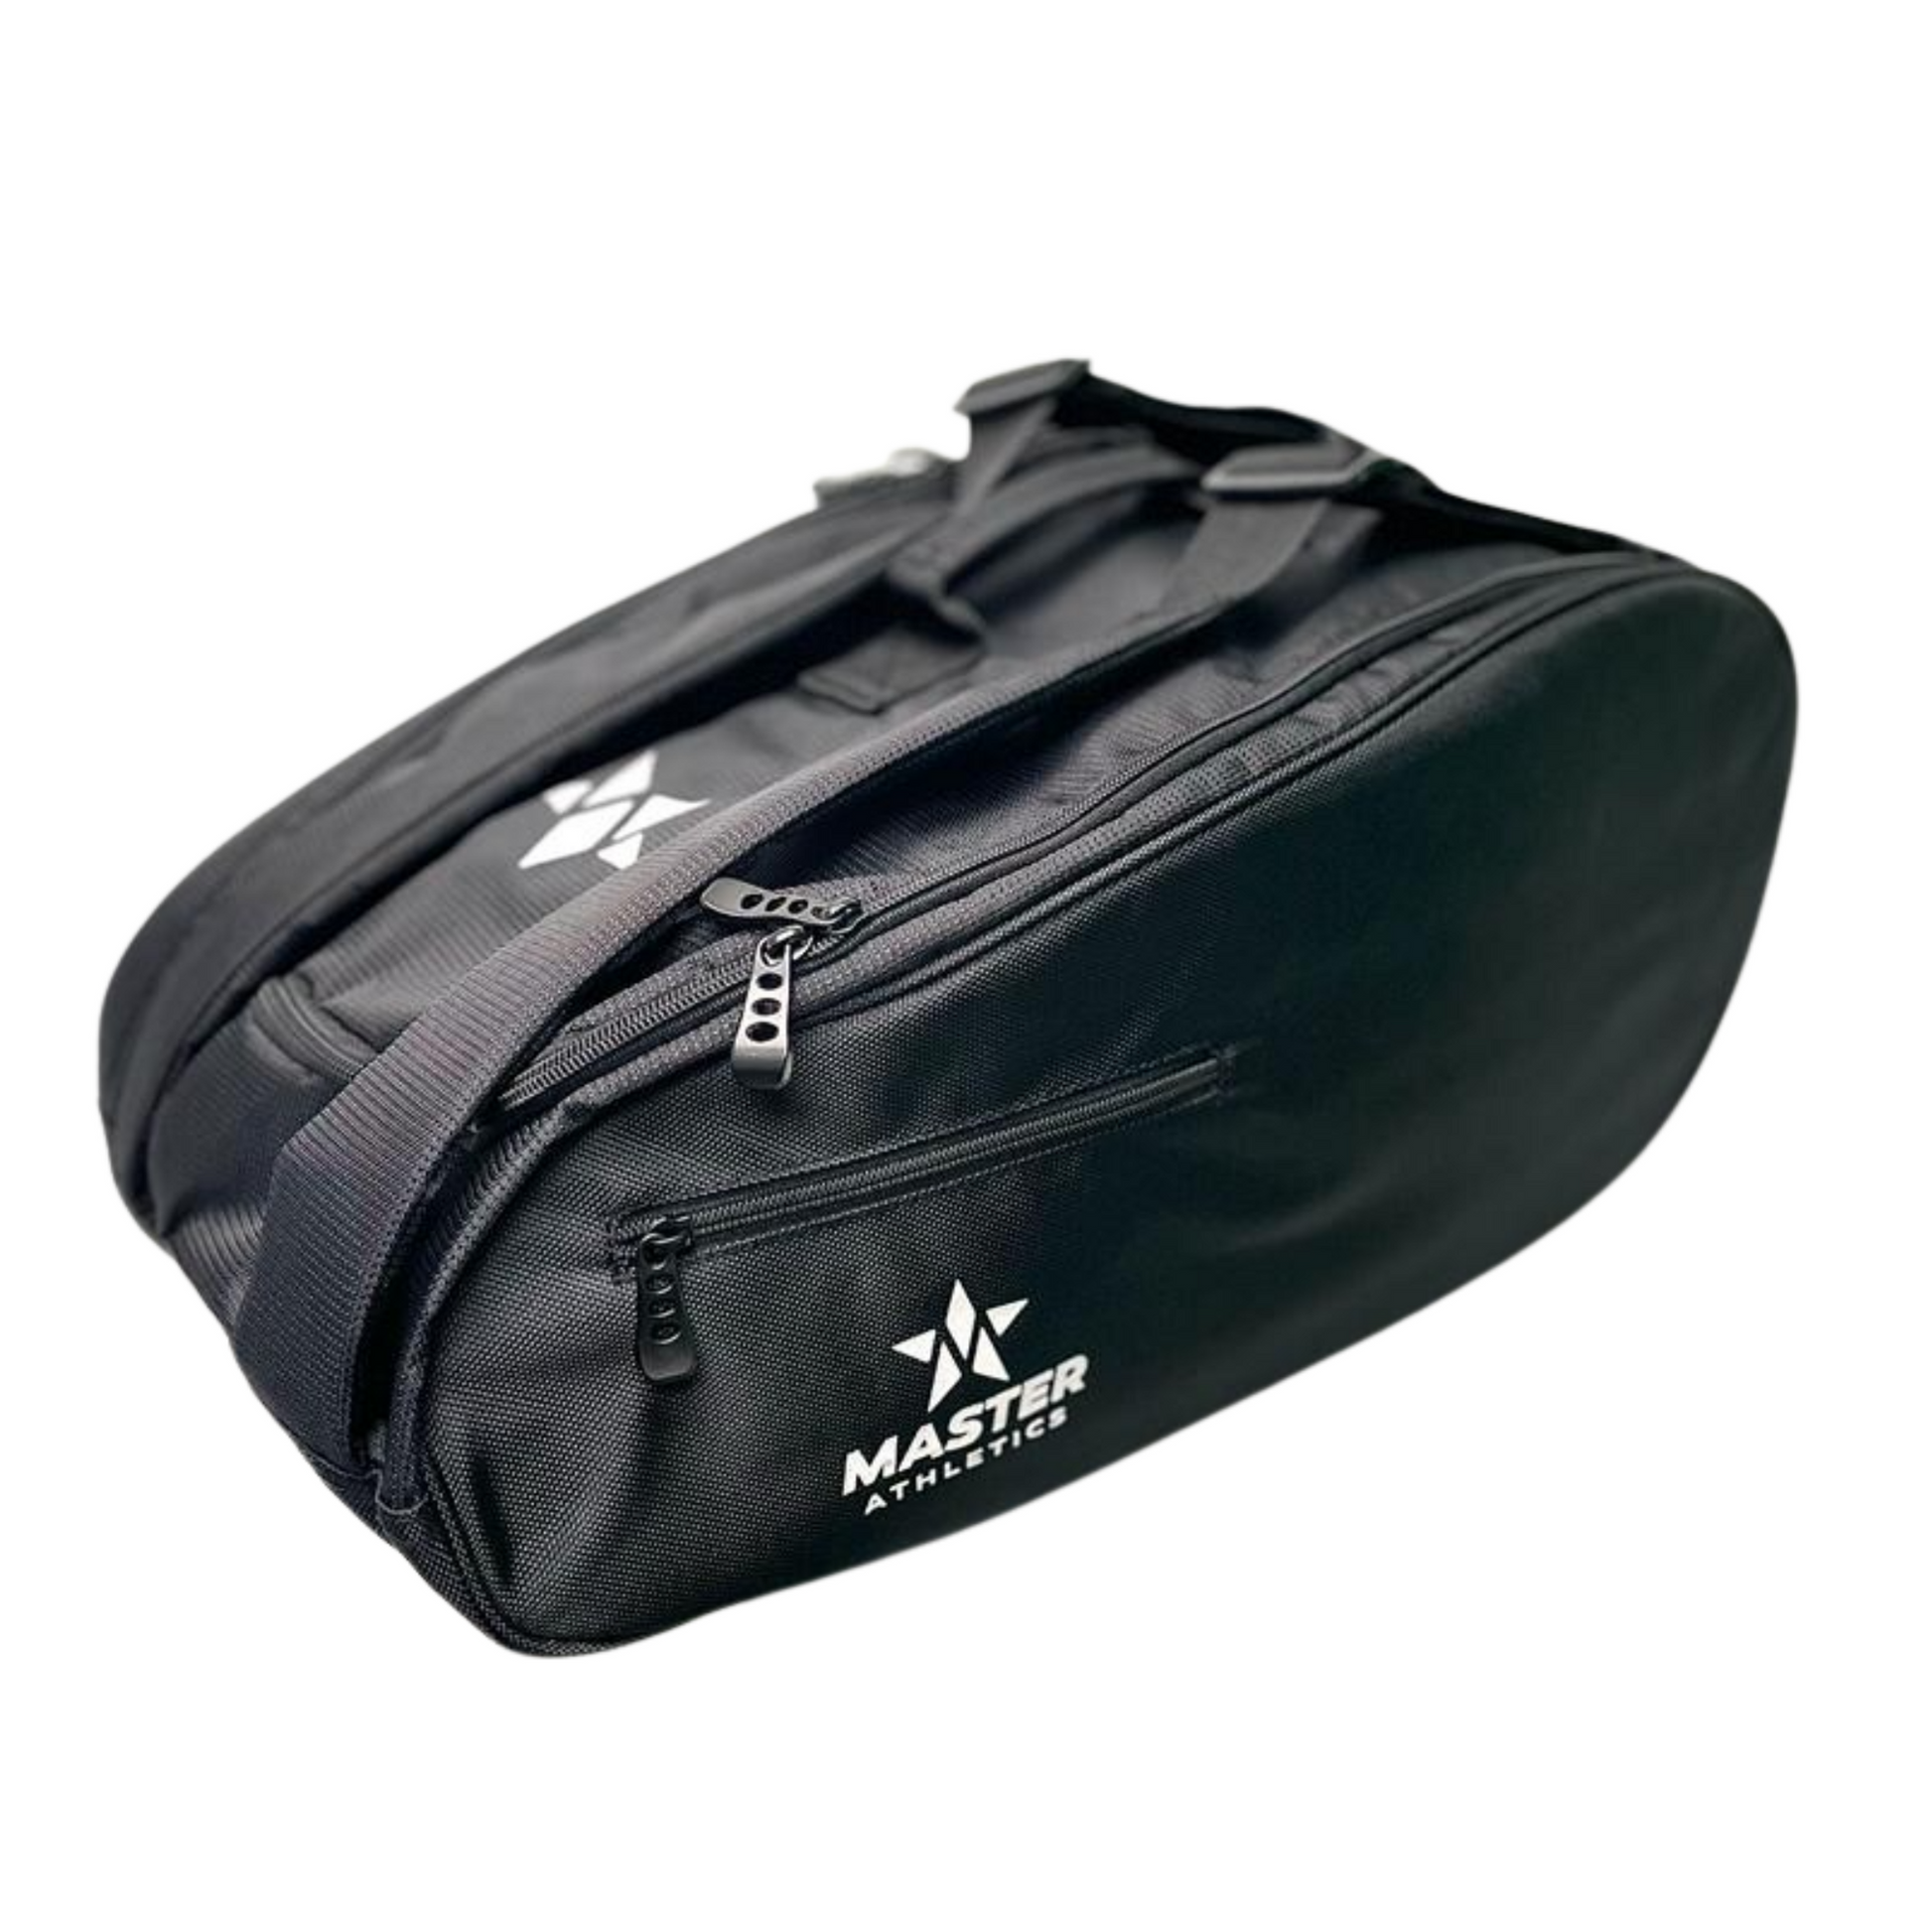 A Master Athletics 2023 Paddle Pack Pickleball Bag with a logo on it.